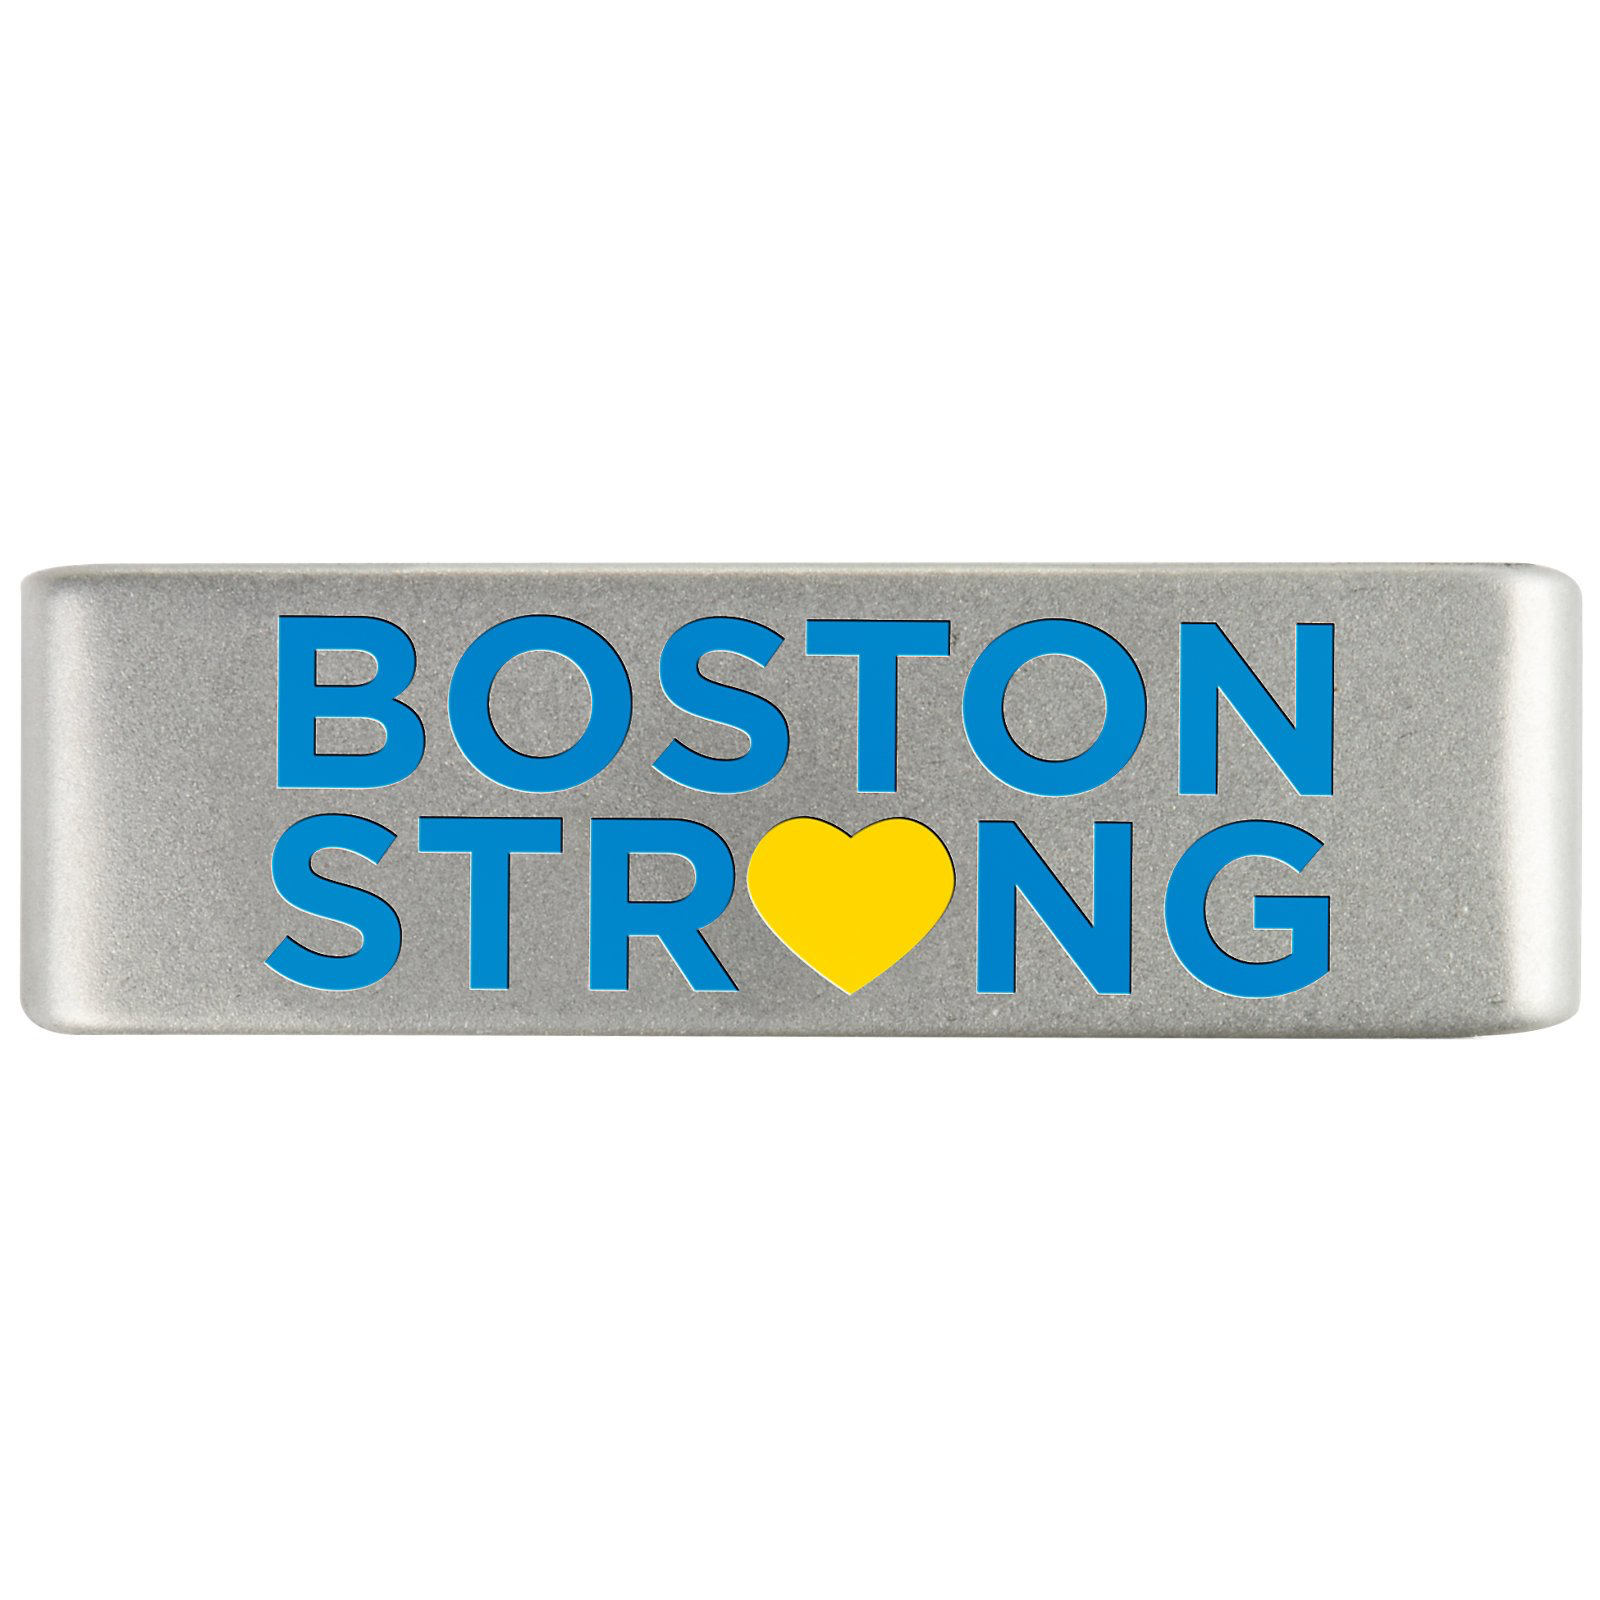 Boston Strong Clearance Badge Clearance Badge 19mm - ROAD iD